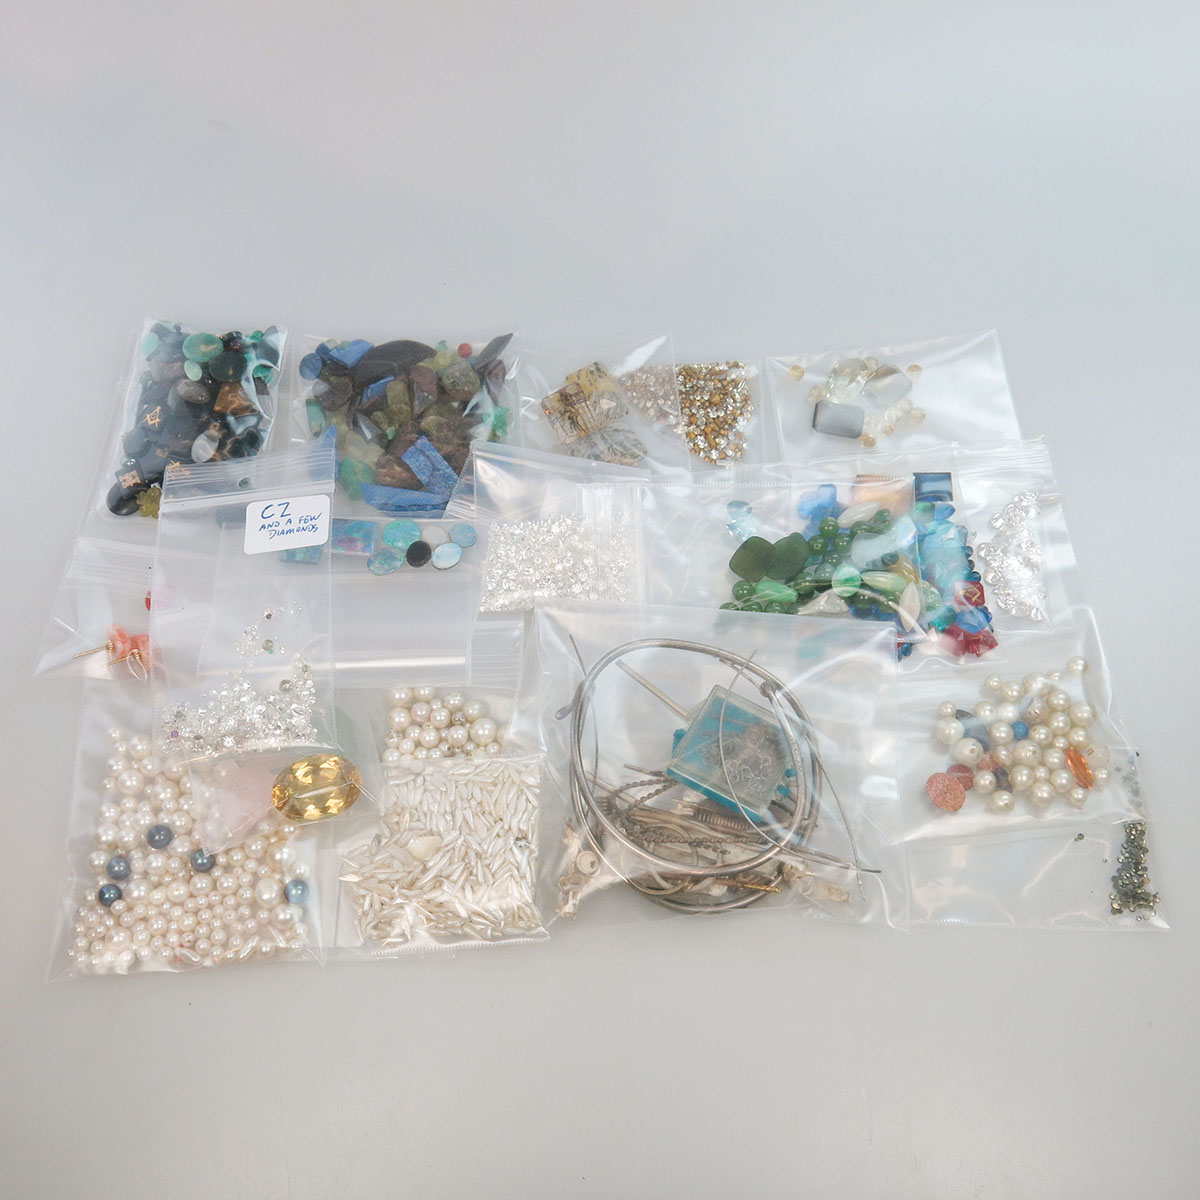 Large Quantity Of Unmounted Gemstones, Pearls And Synthetic Stones